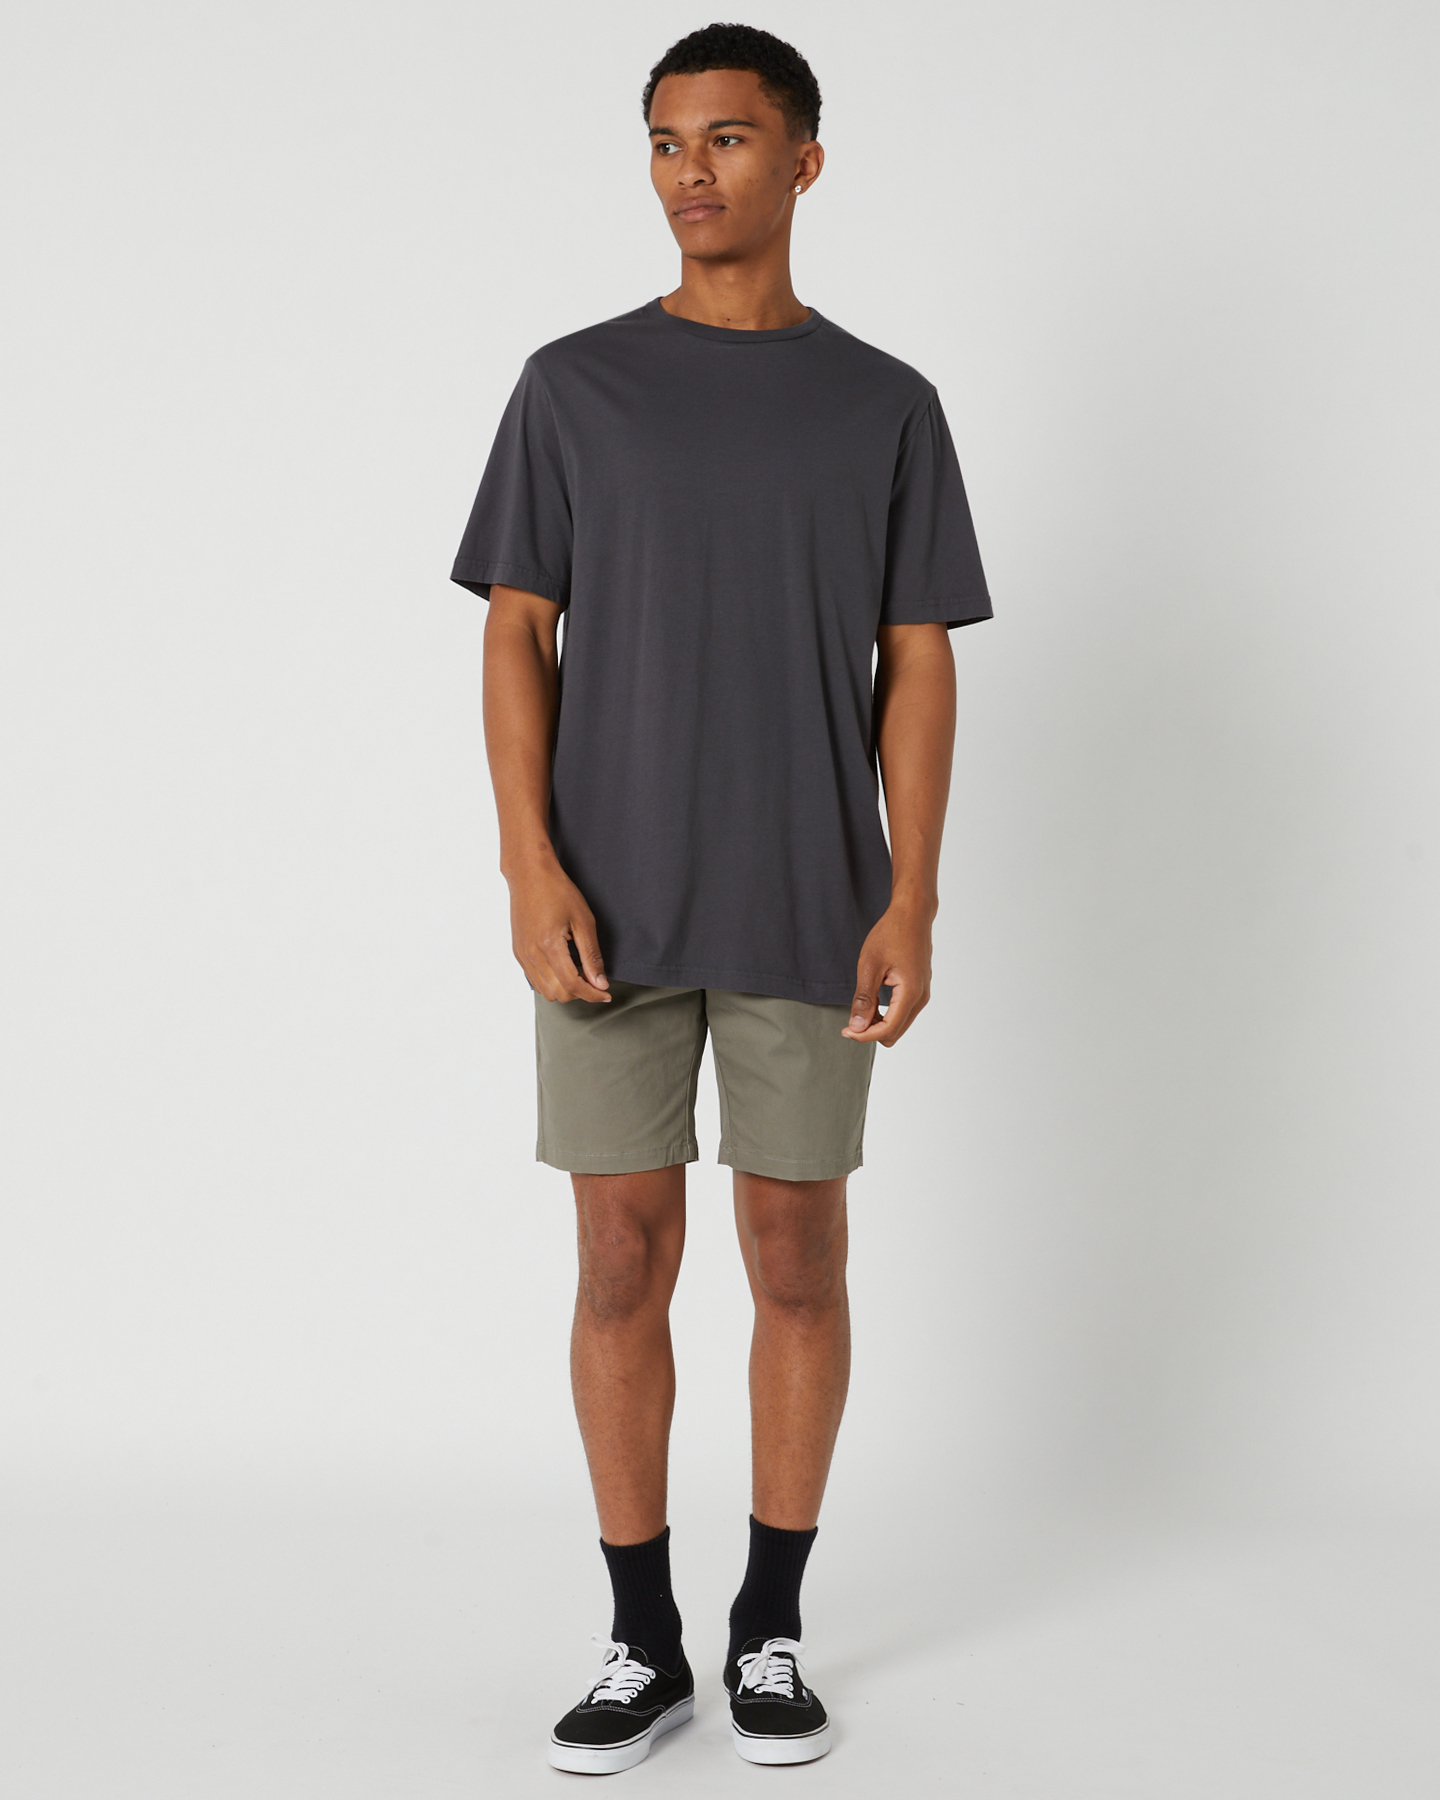 Swell Dandy Chino Short - Military | SurfStitch